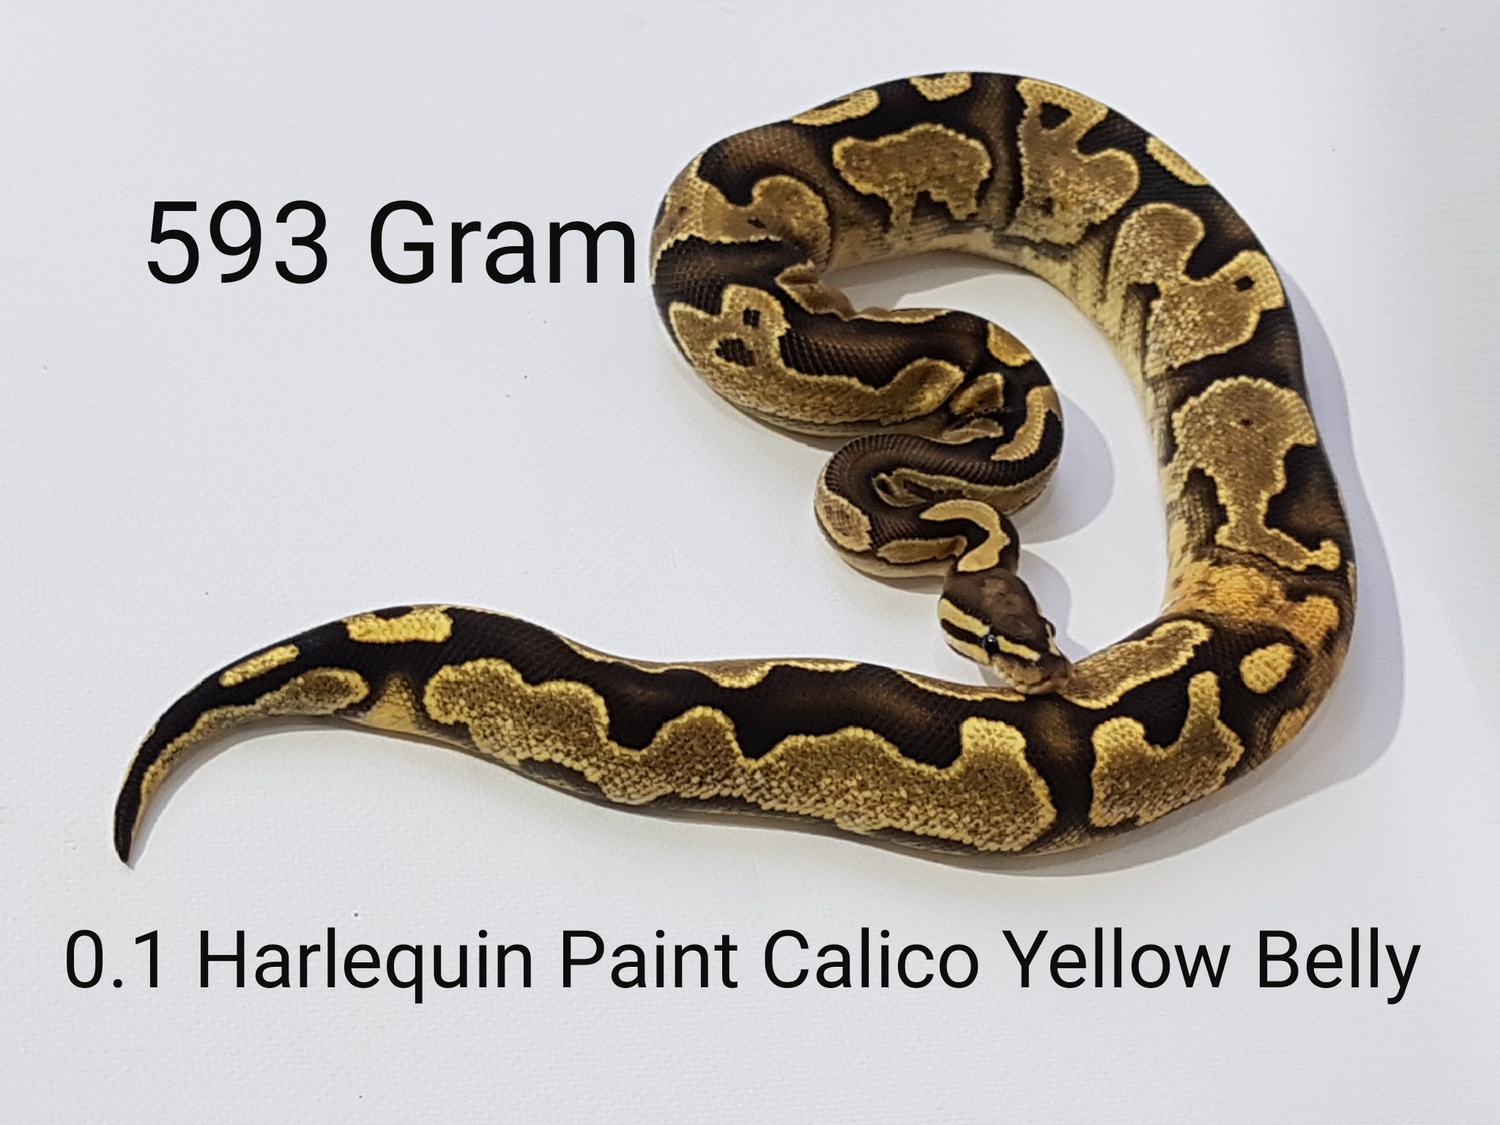 Harlequin Calico Enchi Yellow Belly Paint Ball Python by DH BallPythons